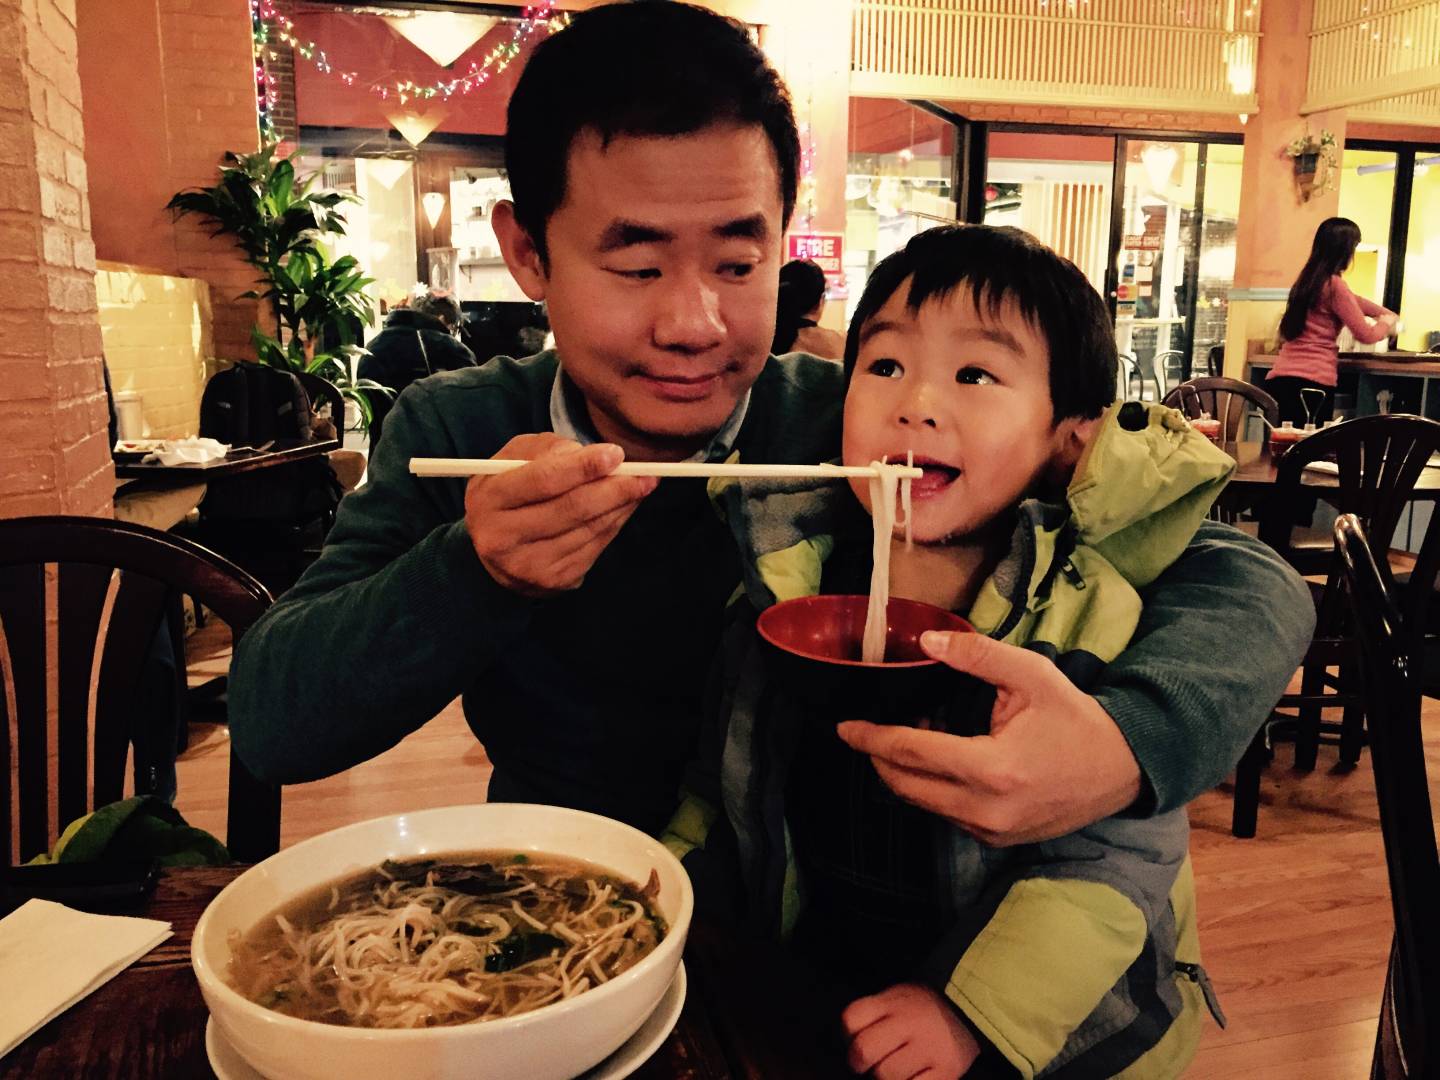 Wang enjoys a meal of noodles with his young son. 